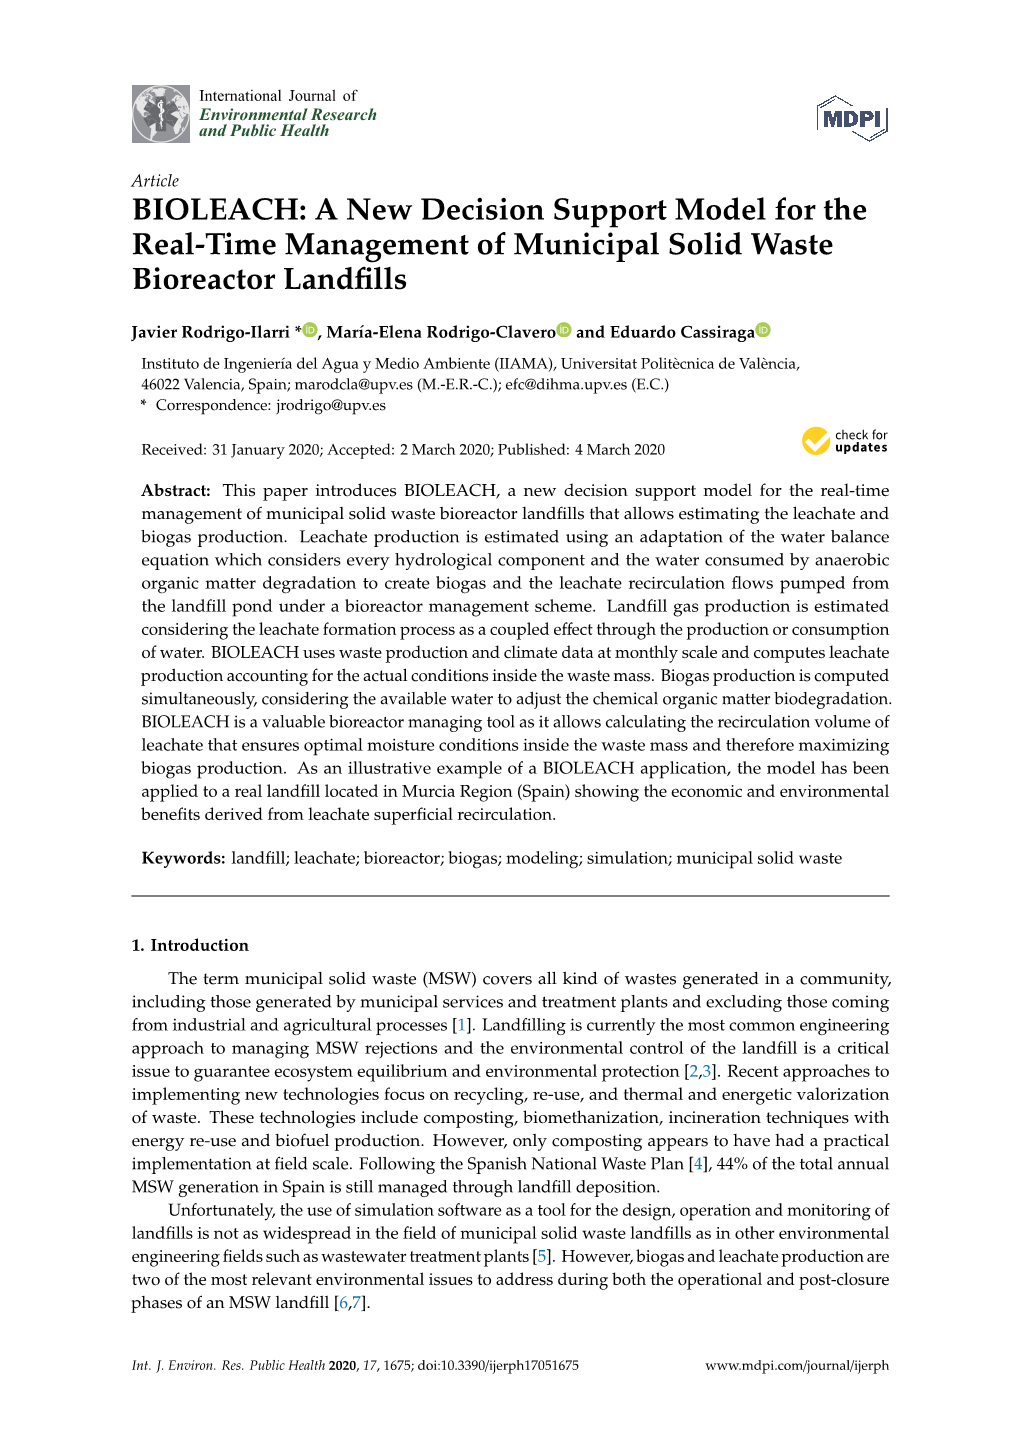 BIOLEACH: a New Decision Support Model for the Real-Time Management of Municipal Solid Waste Bioreactor Landﬁlls